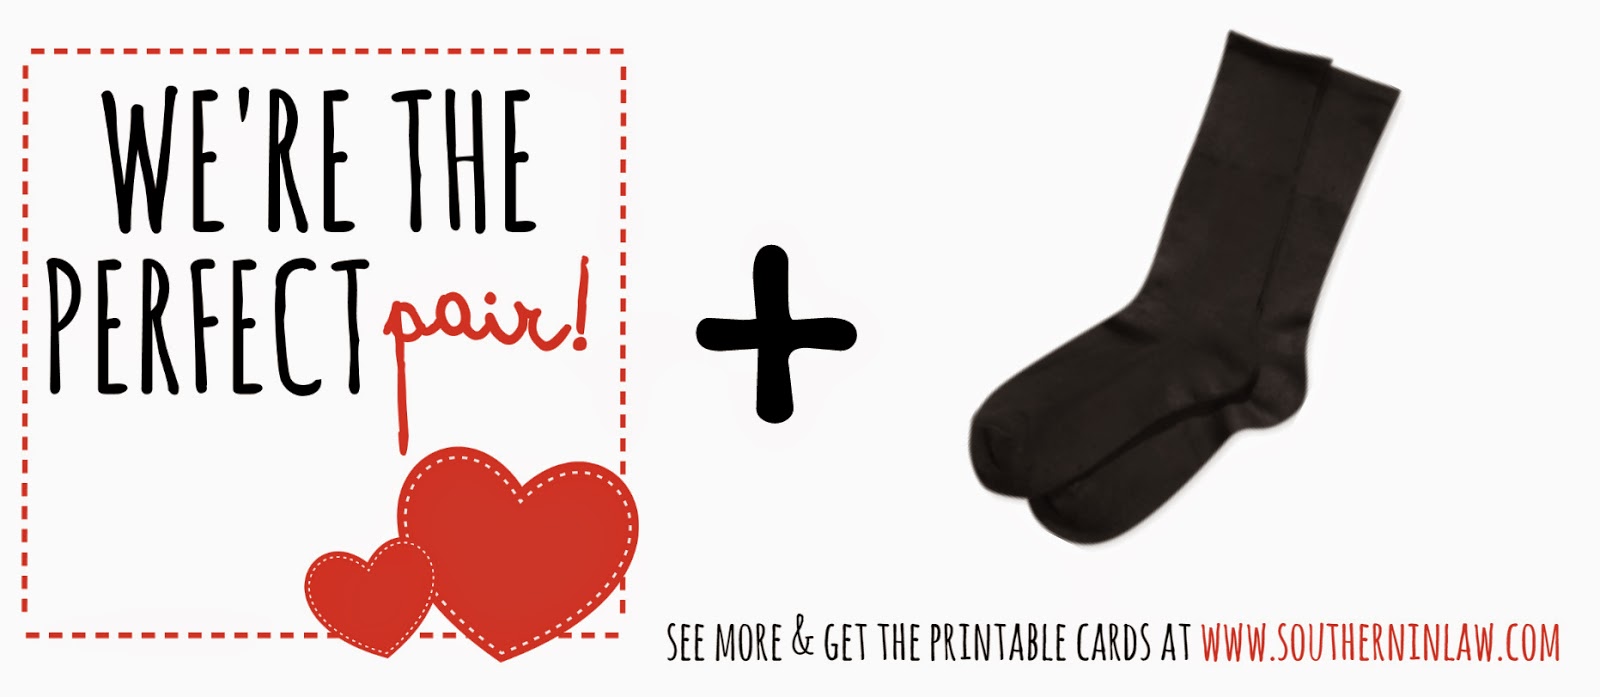 We're the perfect pair - Socks Valentines Gift Idea - Punny Valentines Gift Ideas Free Printable Valentines Cards